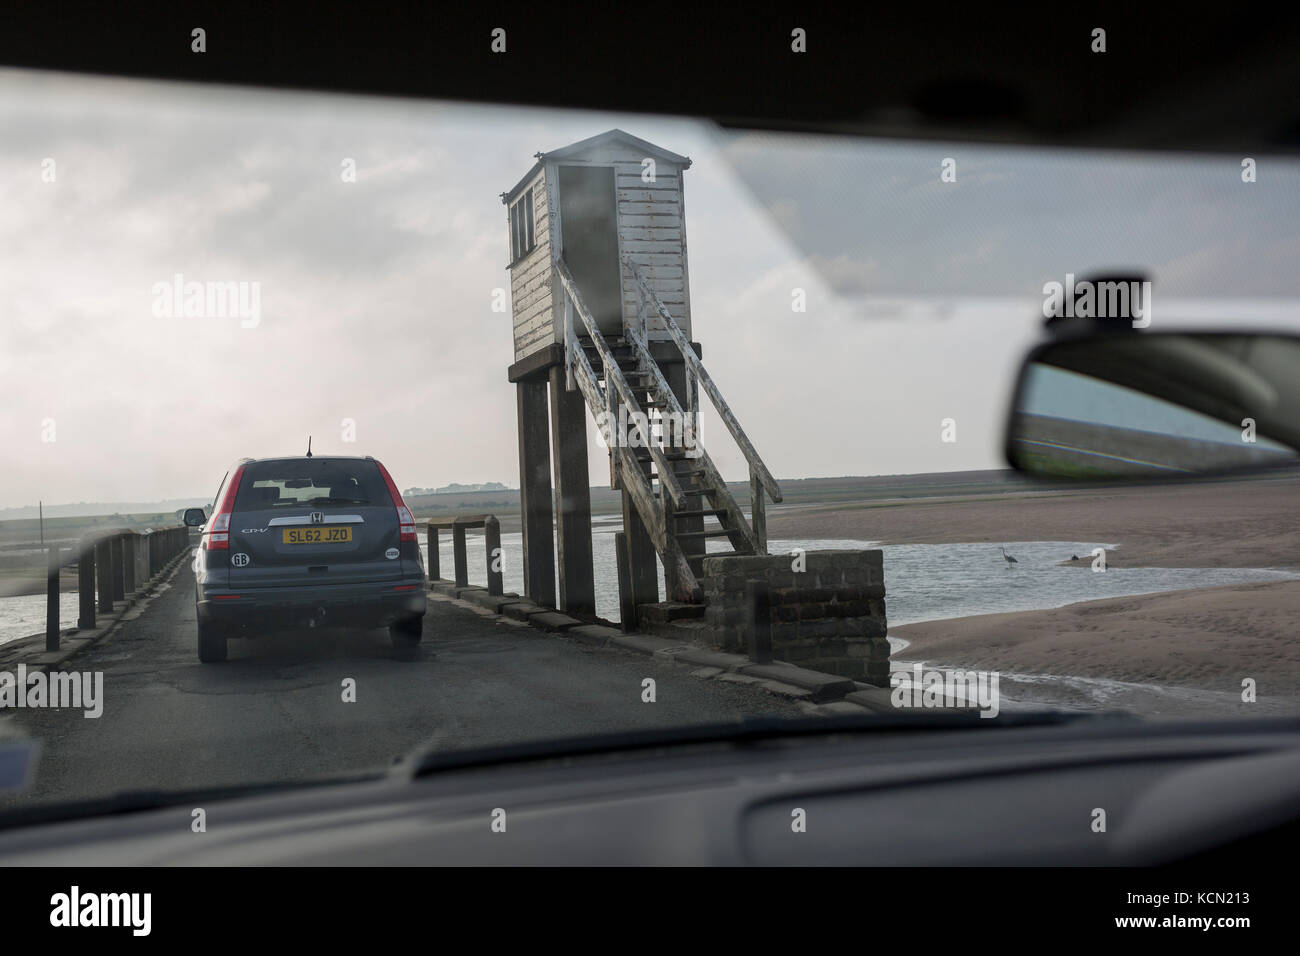 The view through a car's windscreen on the journey over the causeway between the tidal Lindisfarne island and the Northumbrian mainland, on 27th September 2017, on Lindisfarne Island, Northumberland, England. Despite tide timetables posted all over the area, drivers often mis-time their crossings, their vehicles ending up submerged in salt water. The small Lindisfarne population of just over 160 is swelled by the influx of over 650,000 visitors from all over the world every year. A tidal Island: Lindisfarne is a tidal island in that access is by a paved causeway which is covered by the North S Stock Photo